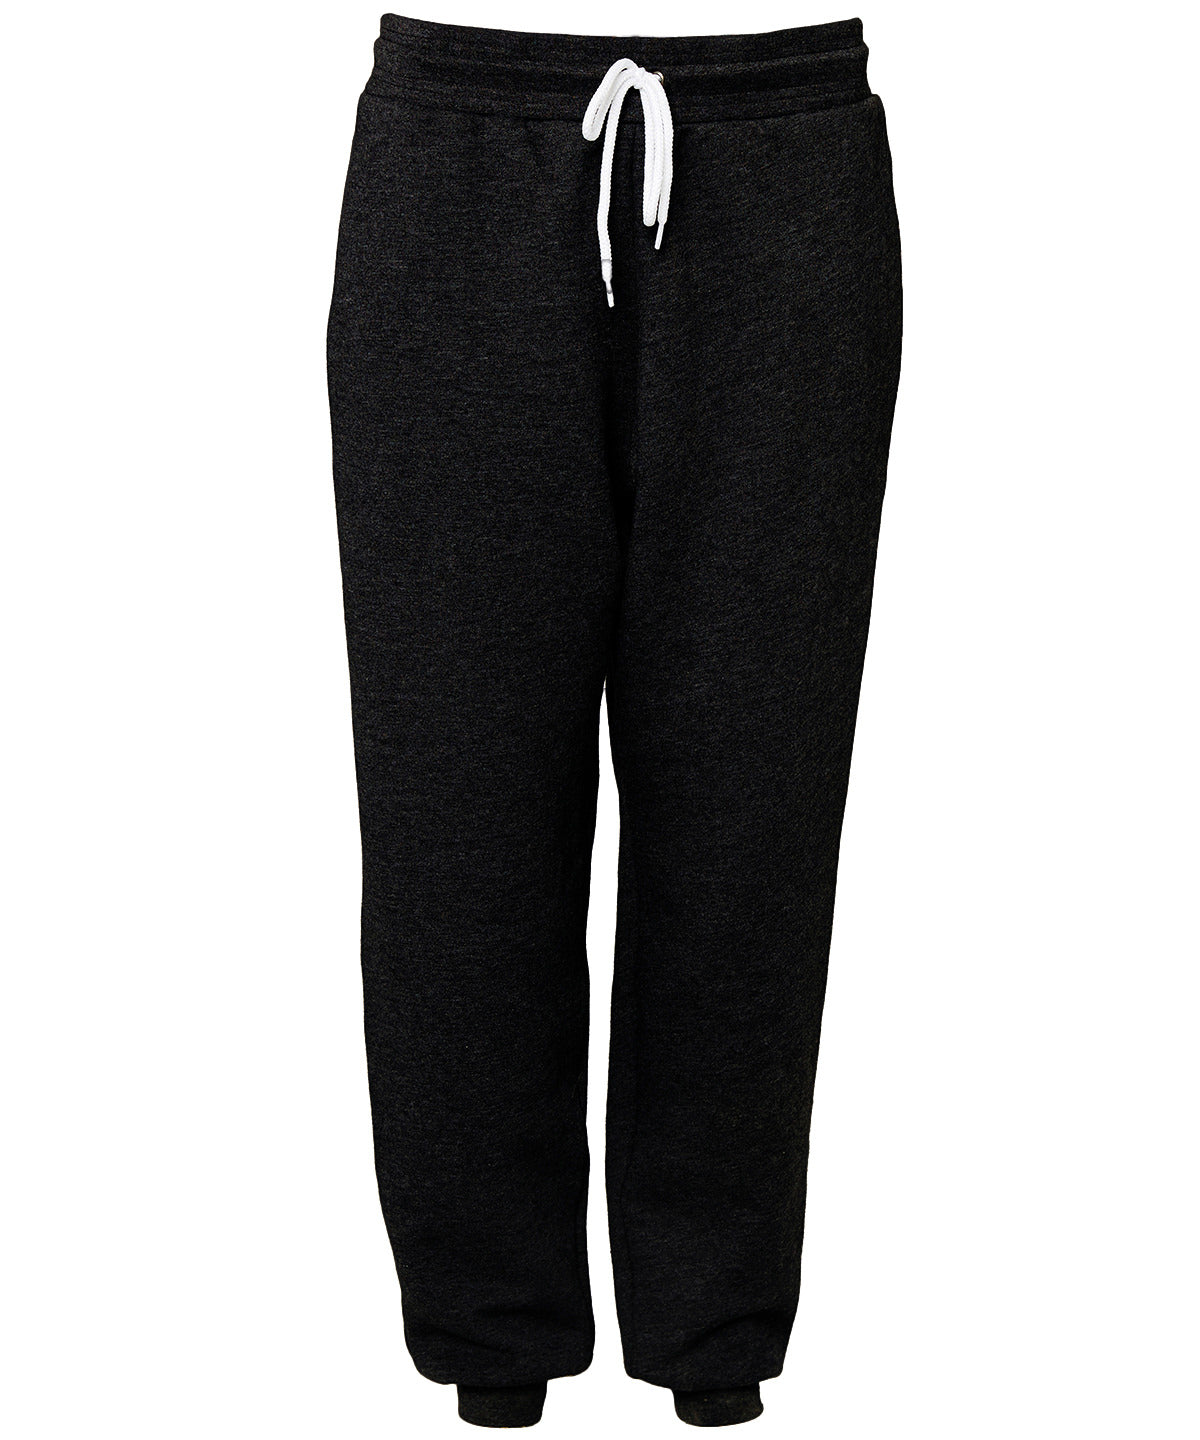 Bella+Canvas CA3727 Unisex Jogger softest fleece fabric Sweatpants Side pockets Ribbed ankle cuff - COOZO